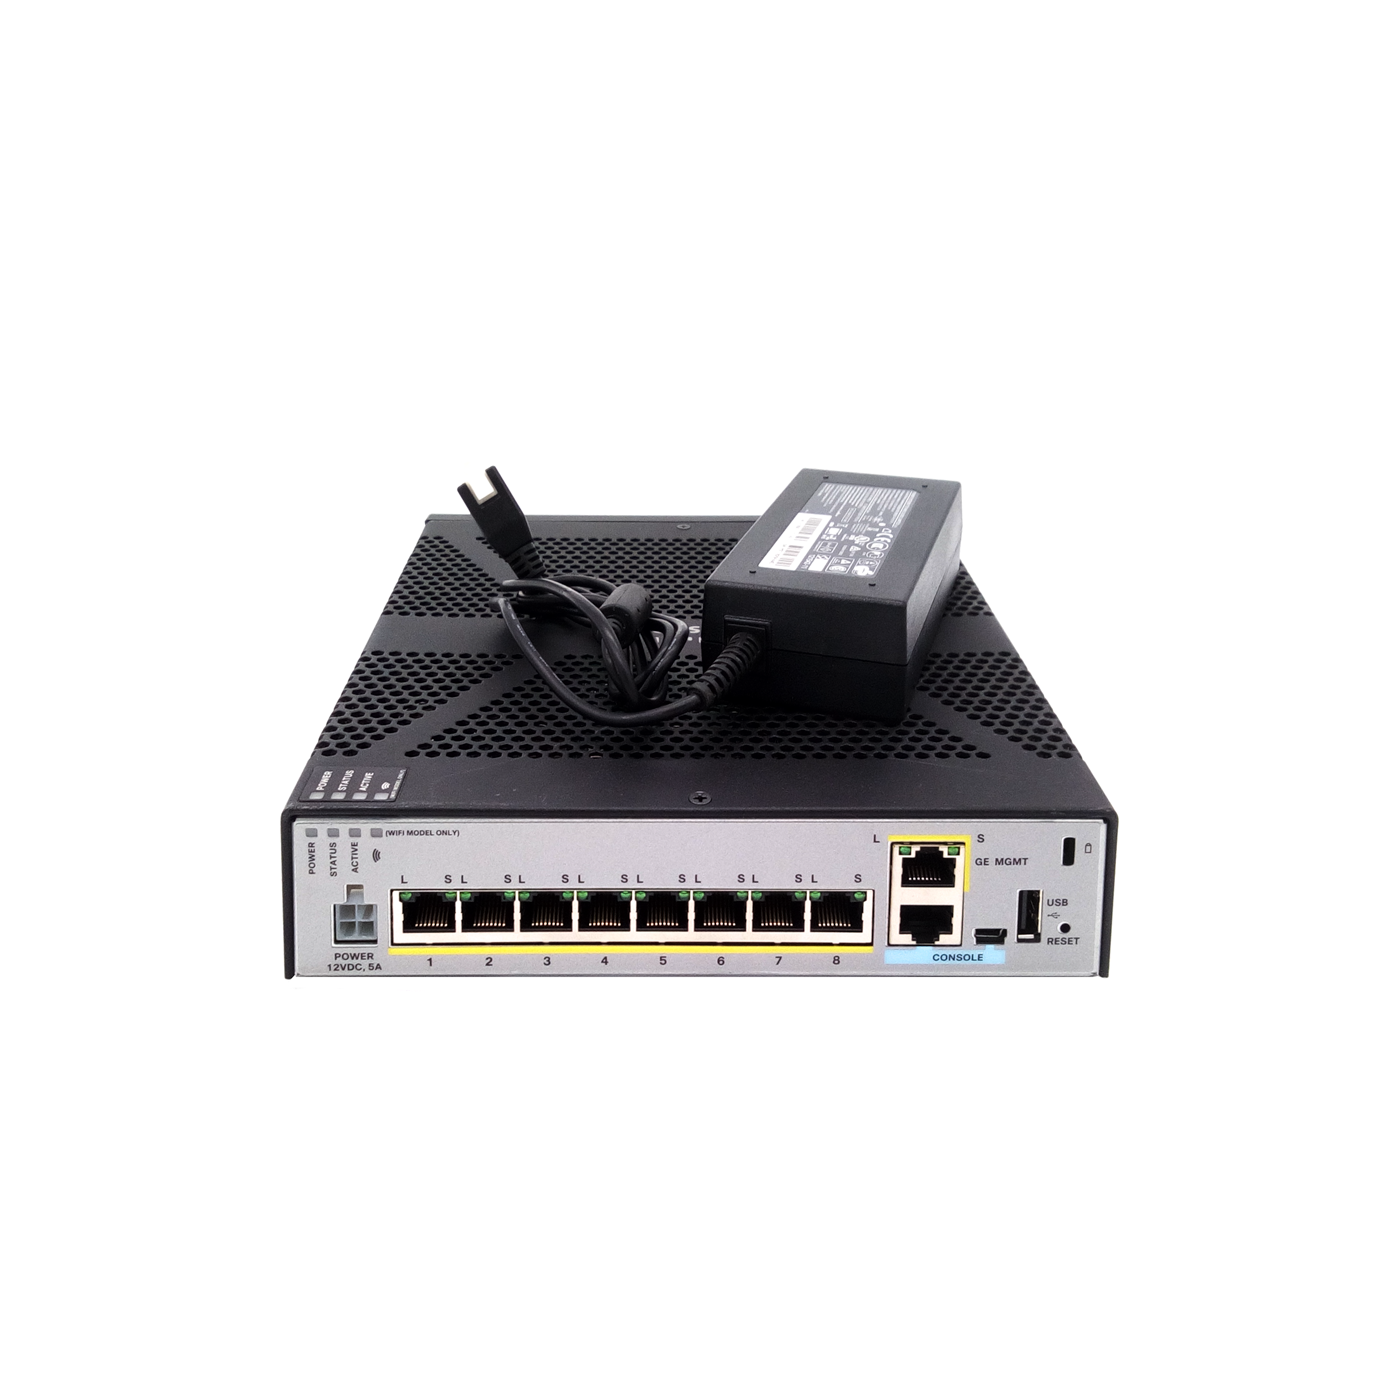 Cisco ASA 5506-X 8GE Data 1GE Mgmt AC 3DES/AES - Dedicated Networks